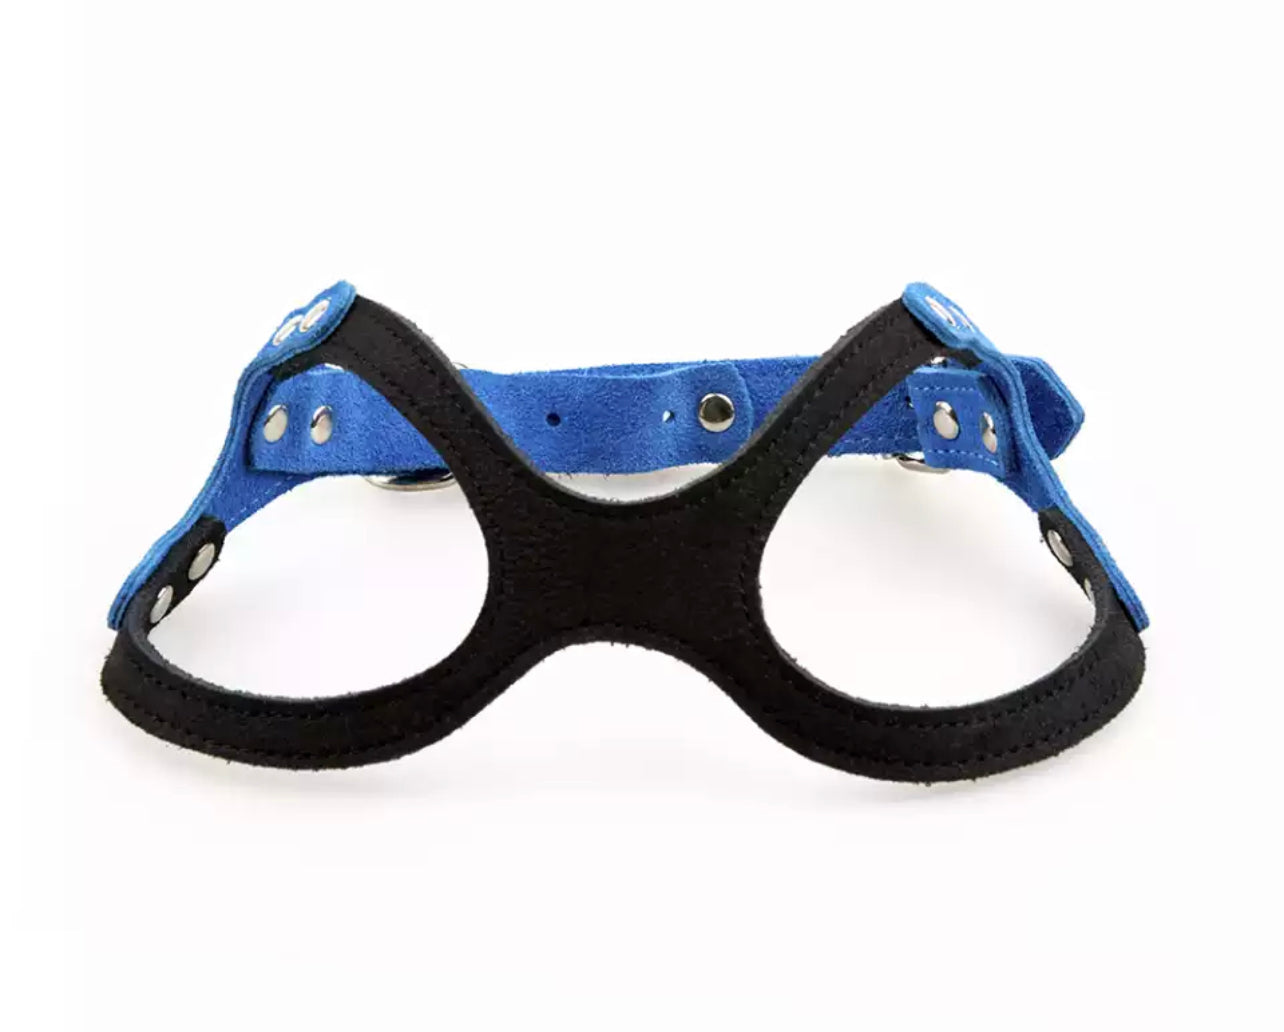 Suede Leather Harness - Blue/Black